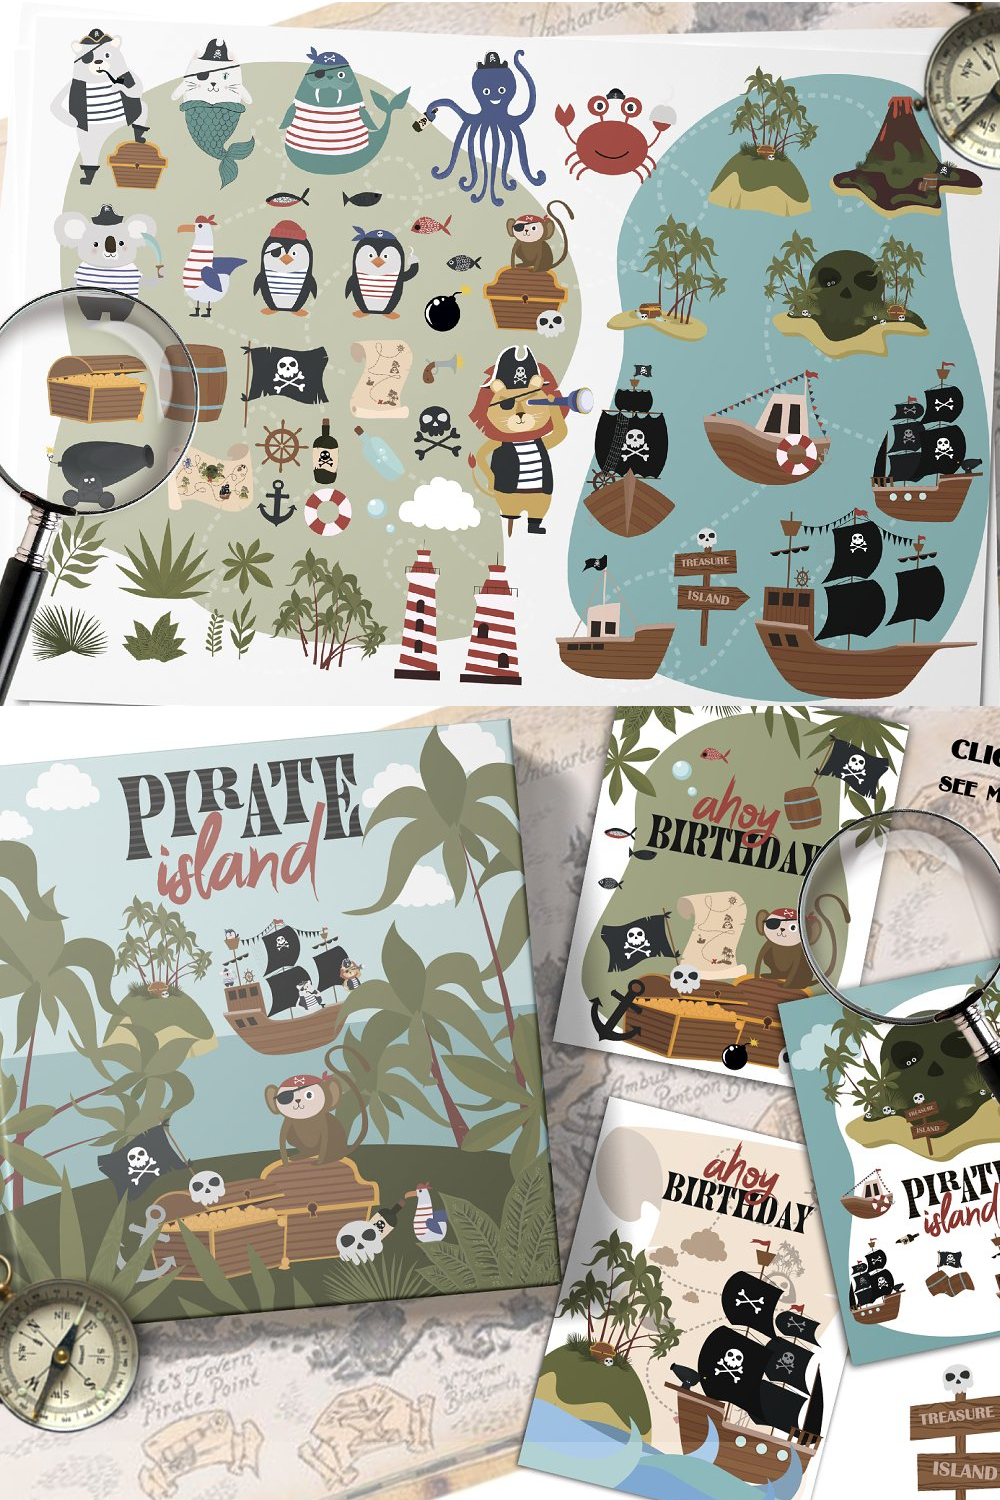 Illustrations pirate island collection of pinterest.